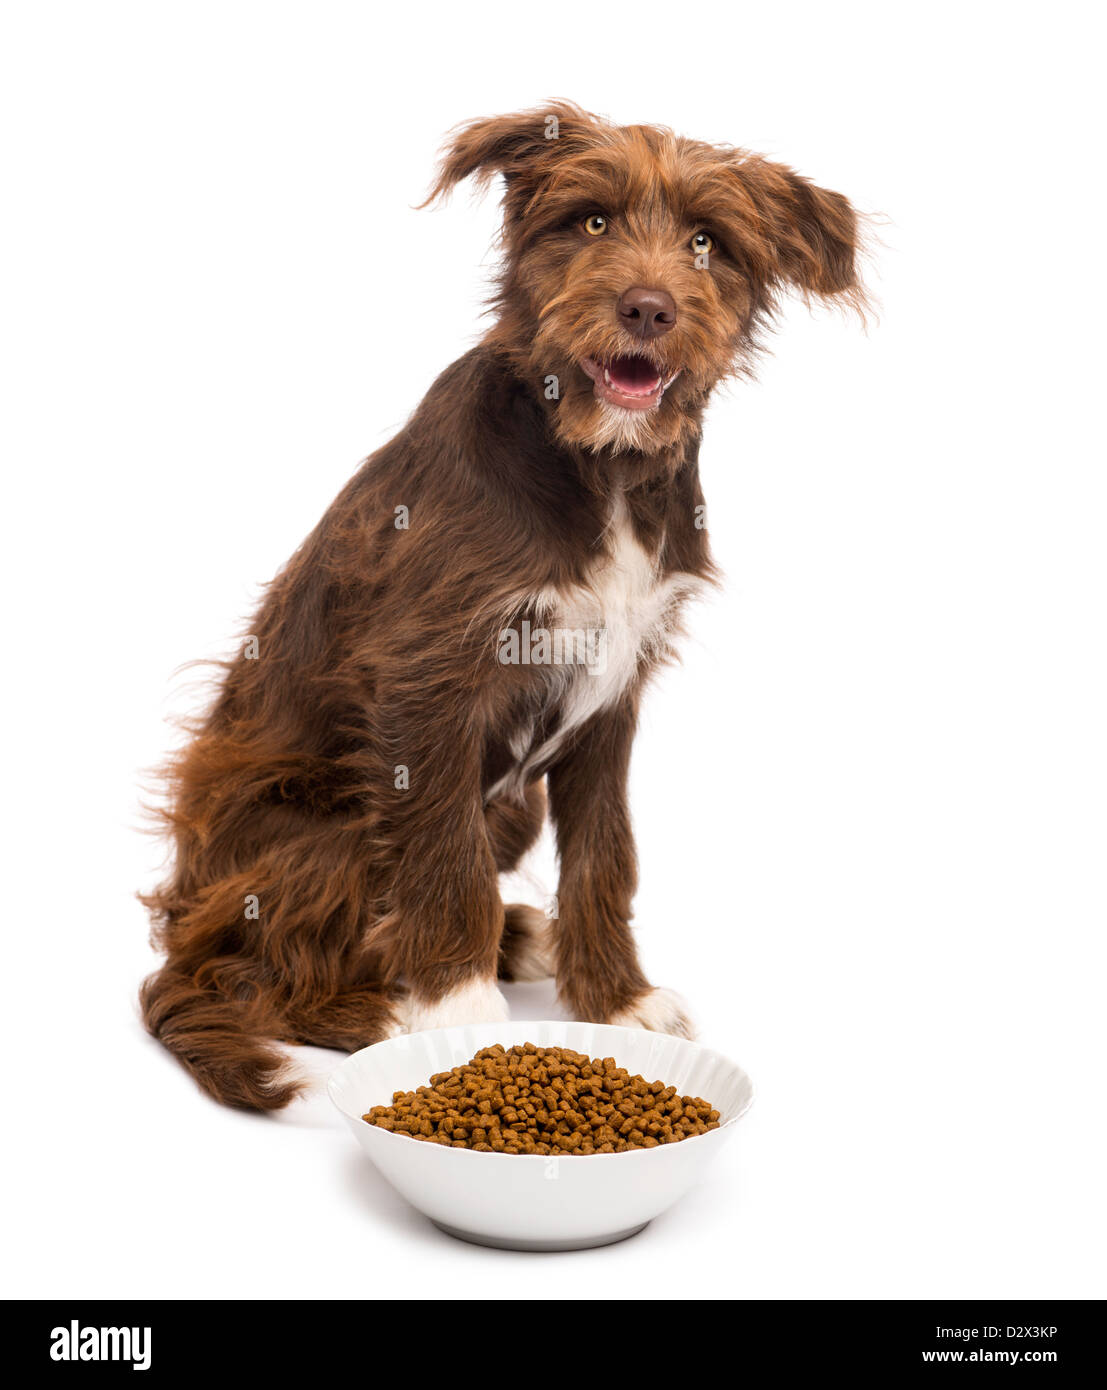 Crossbreed, 5 months old, sitting next to bowl of dog food against white background Stock Photo